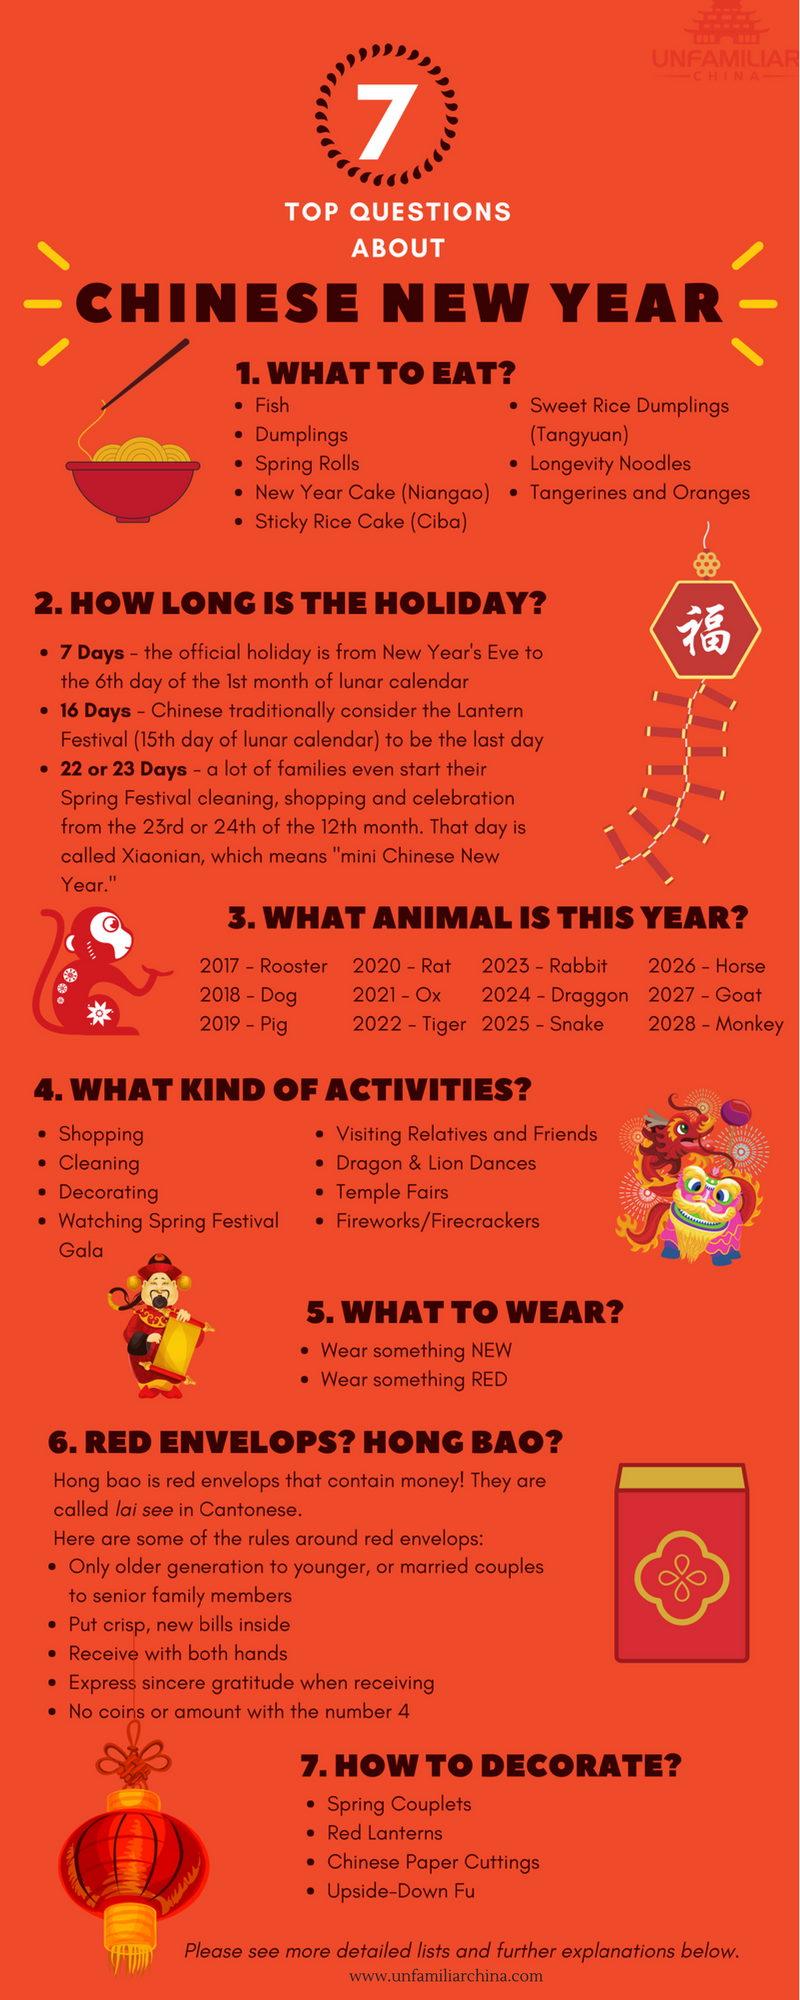 Top Questions About Chinese New Year 